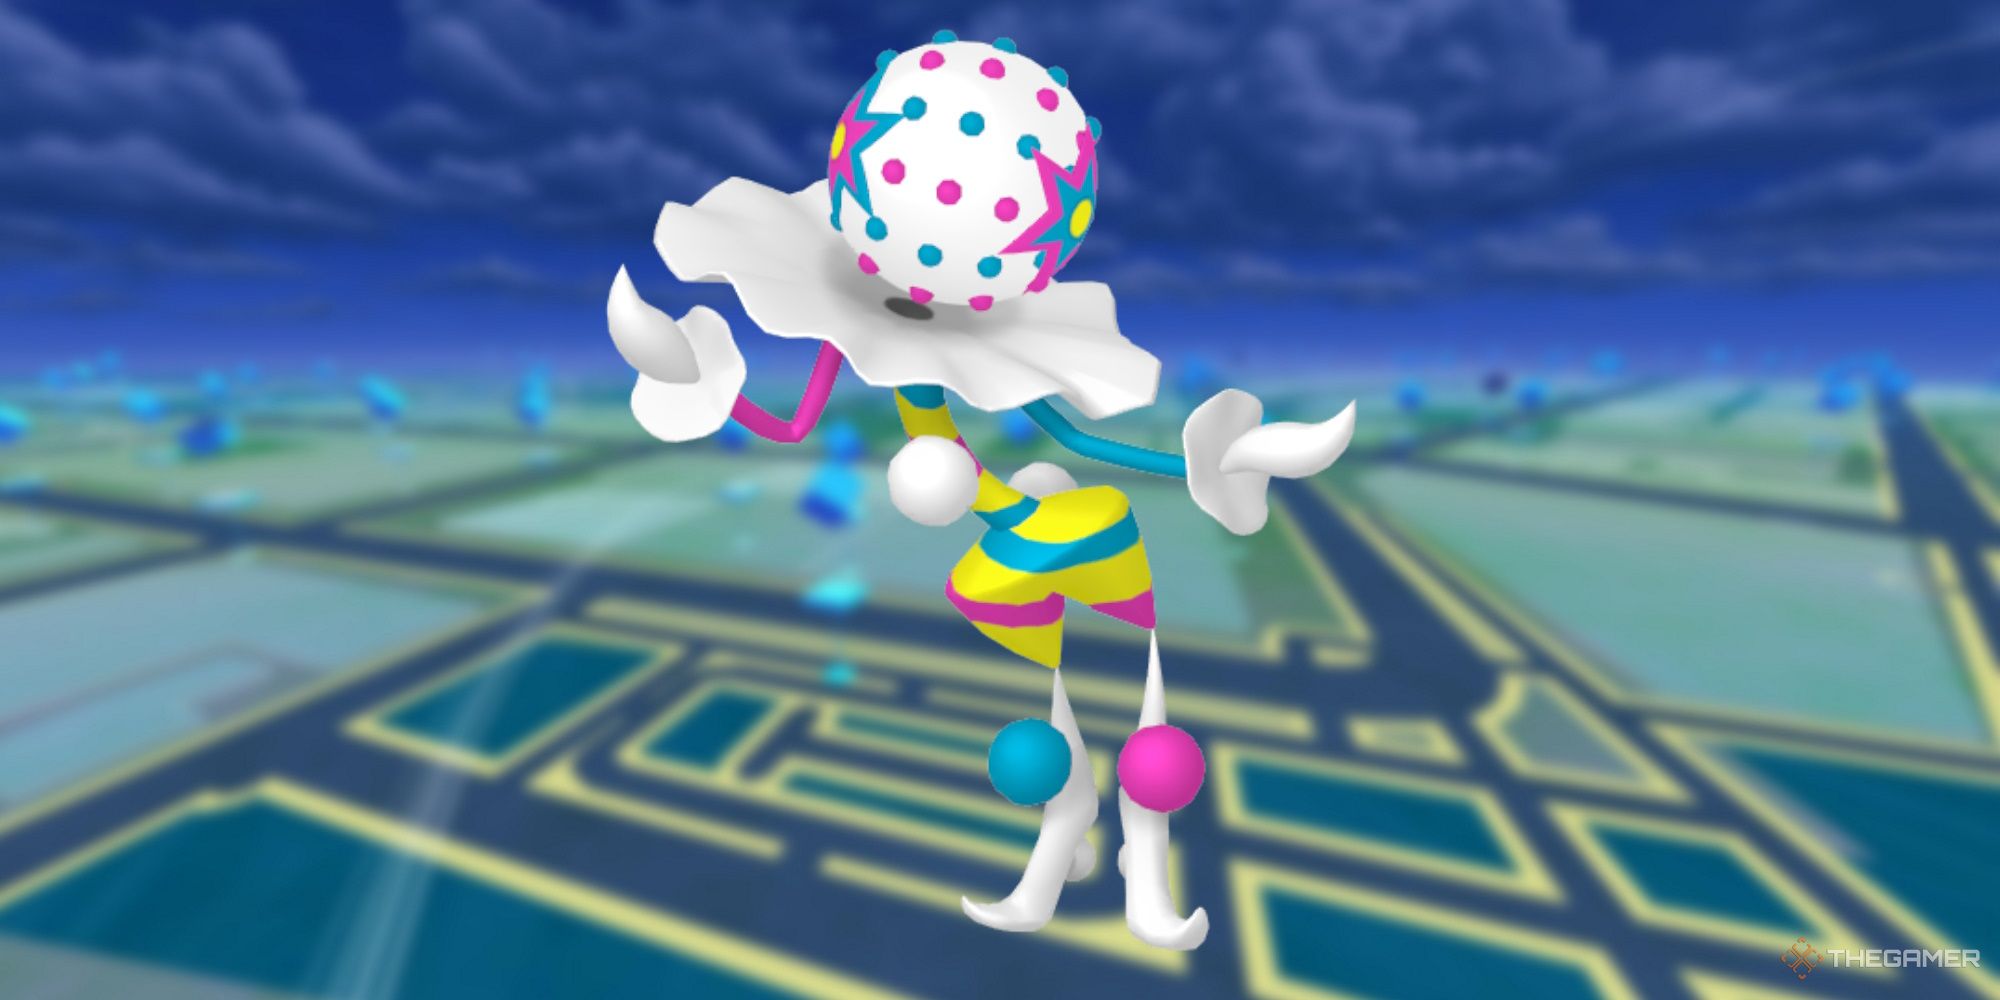 Image of Blacephalon from Pokemon with the Pokemon Go map as the background